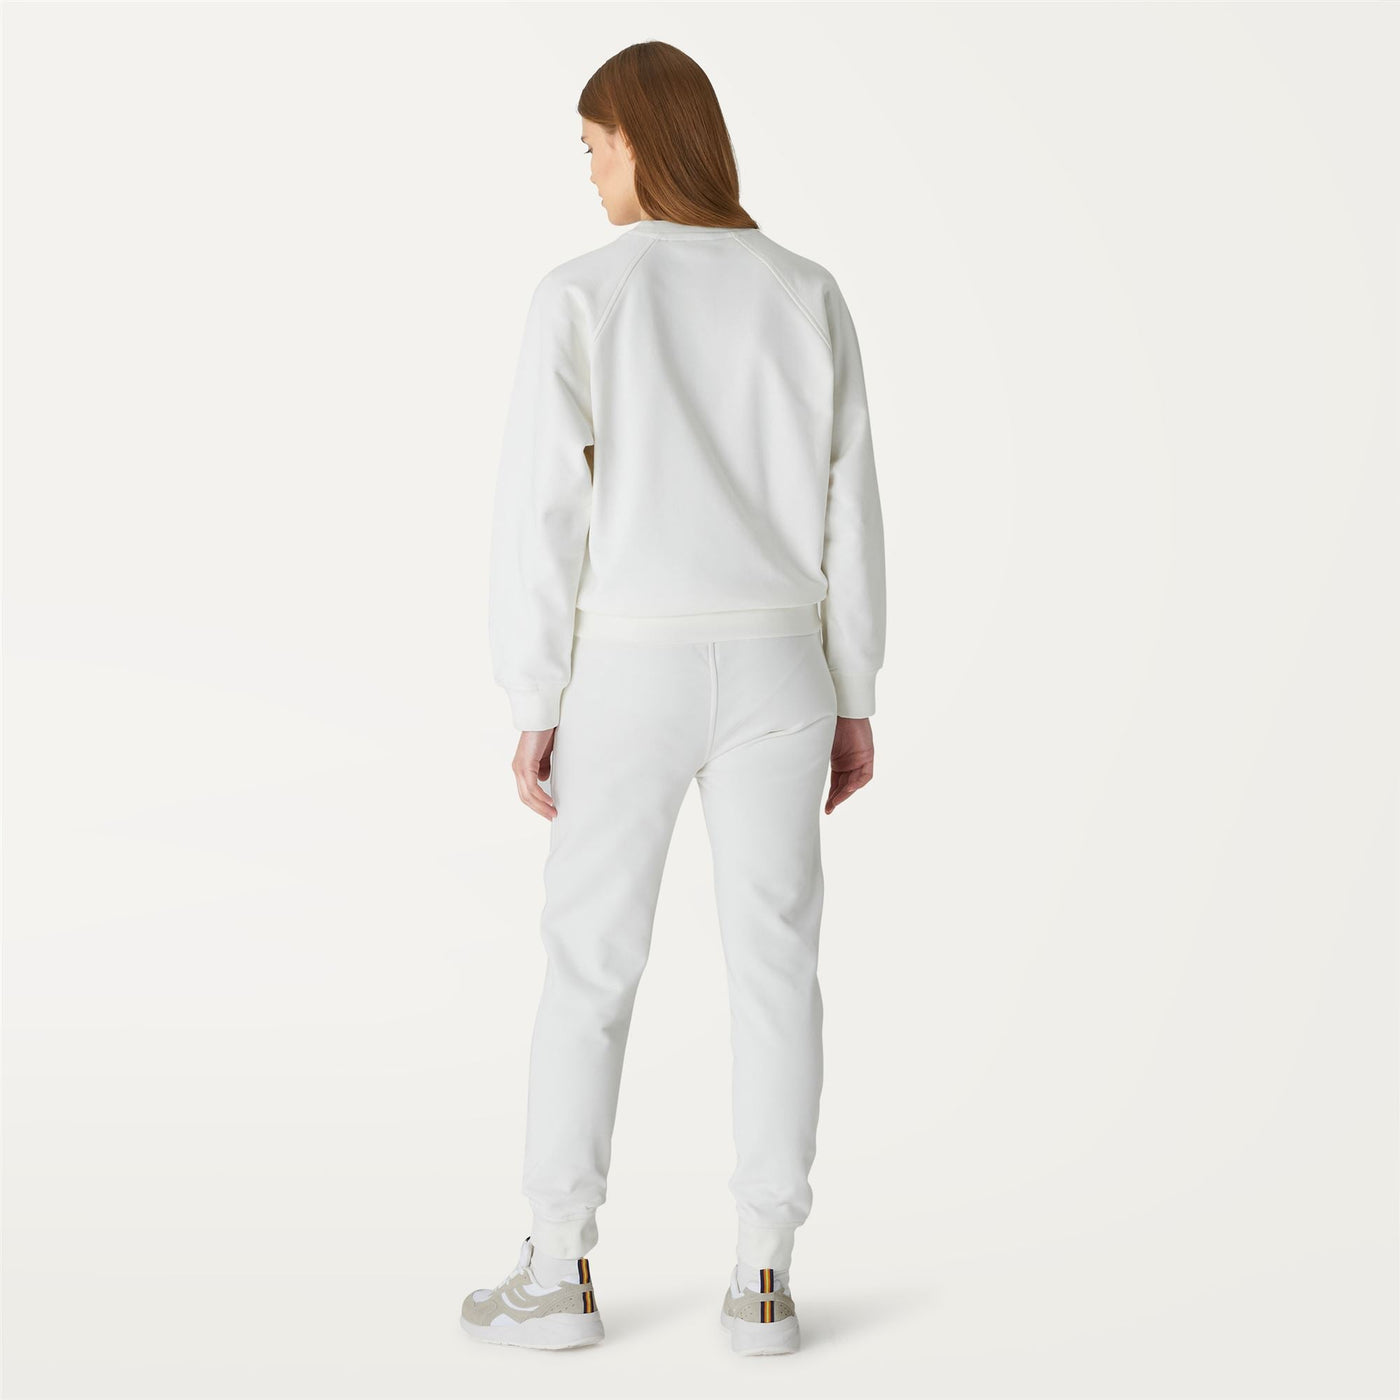 Pants Woman GINEVRA Sport Trousers White | K-Way Dressed Front Double		